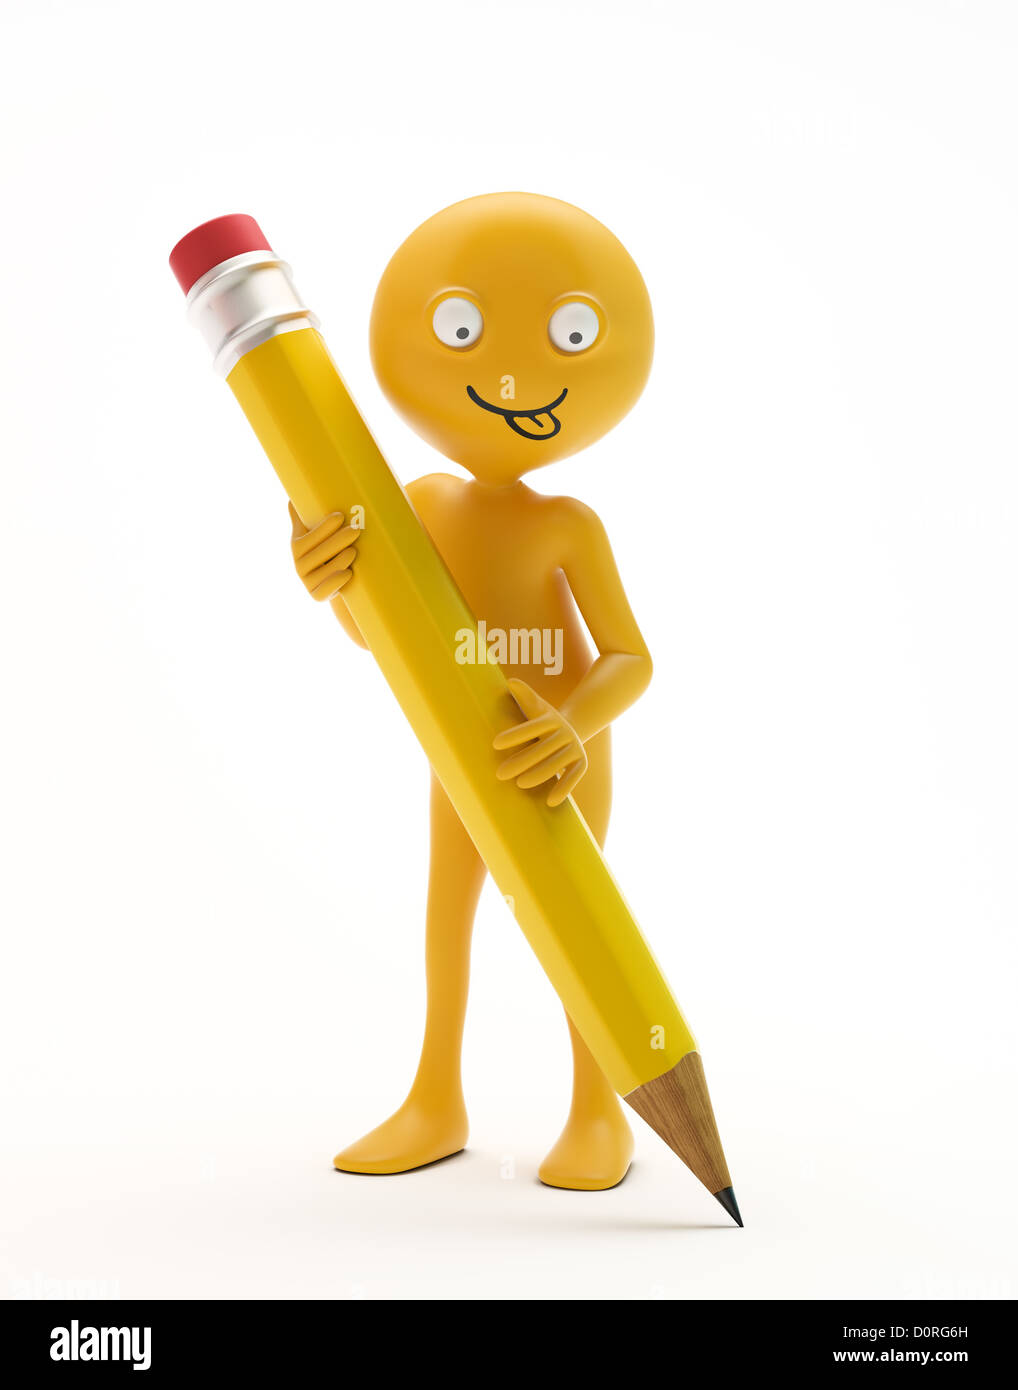 Smiley holding a pencil Stock Photo